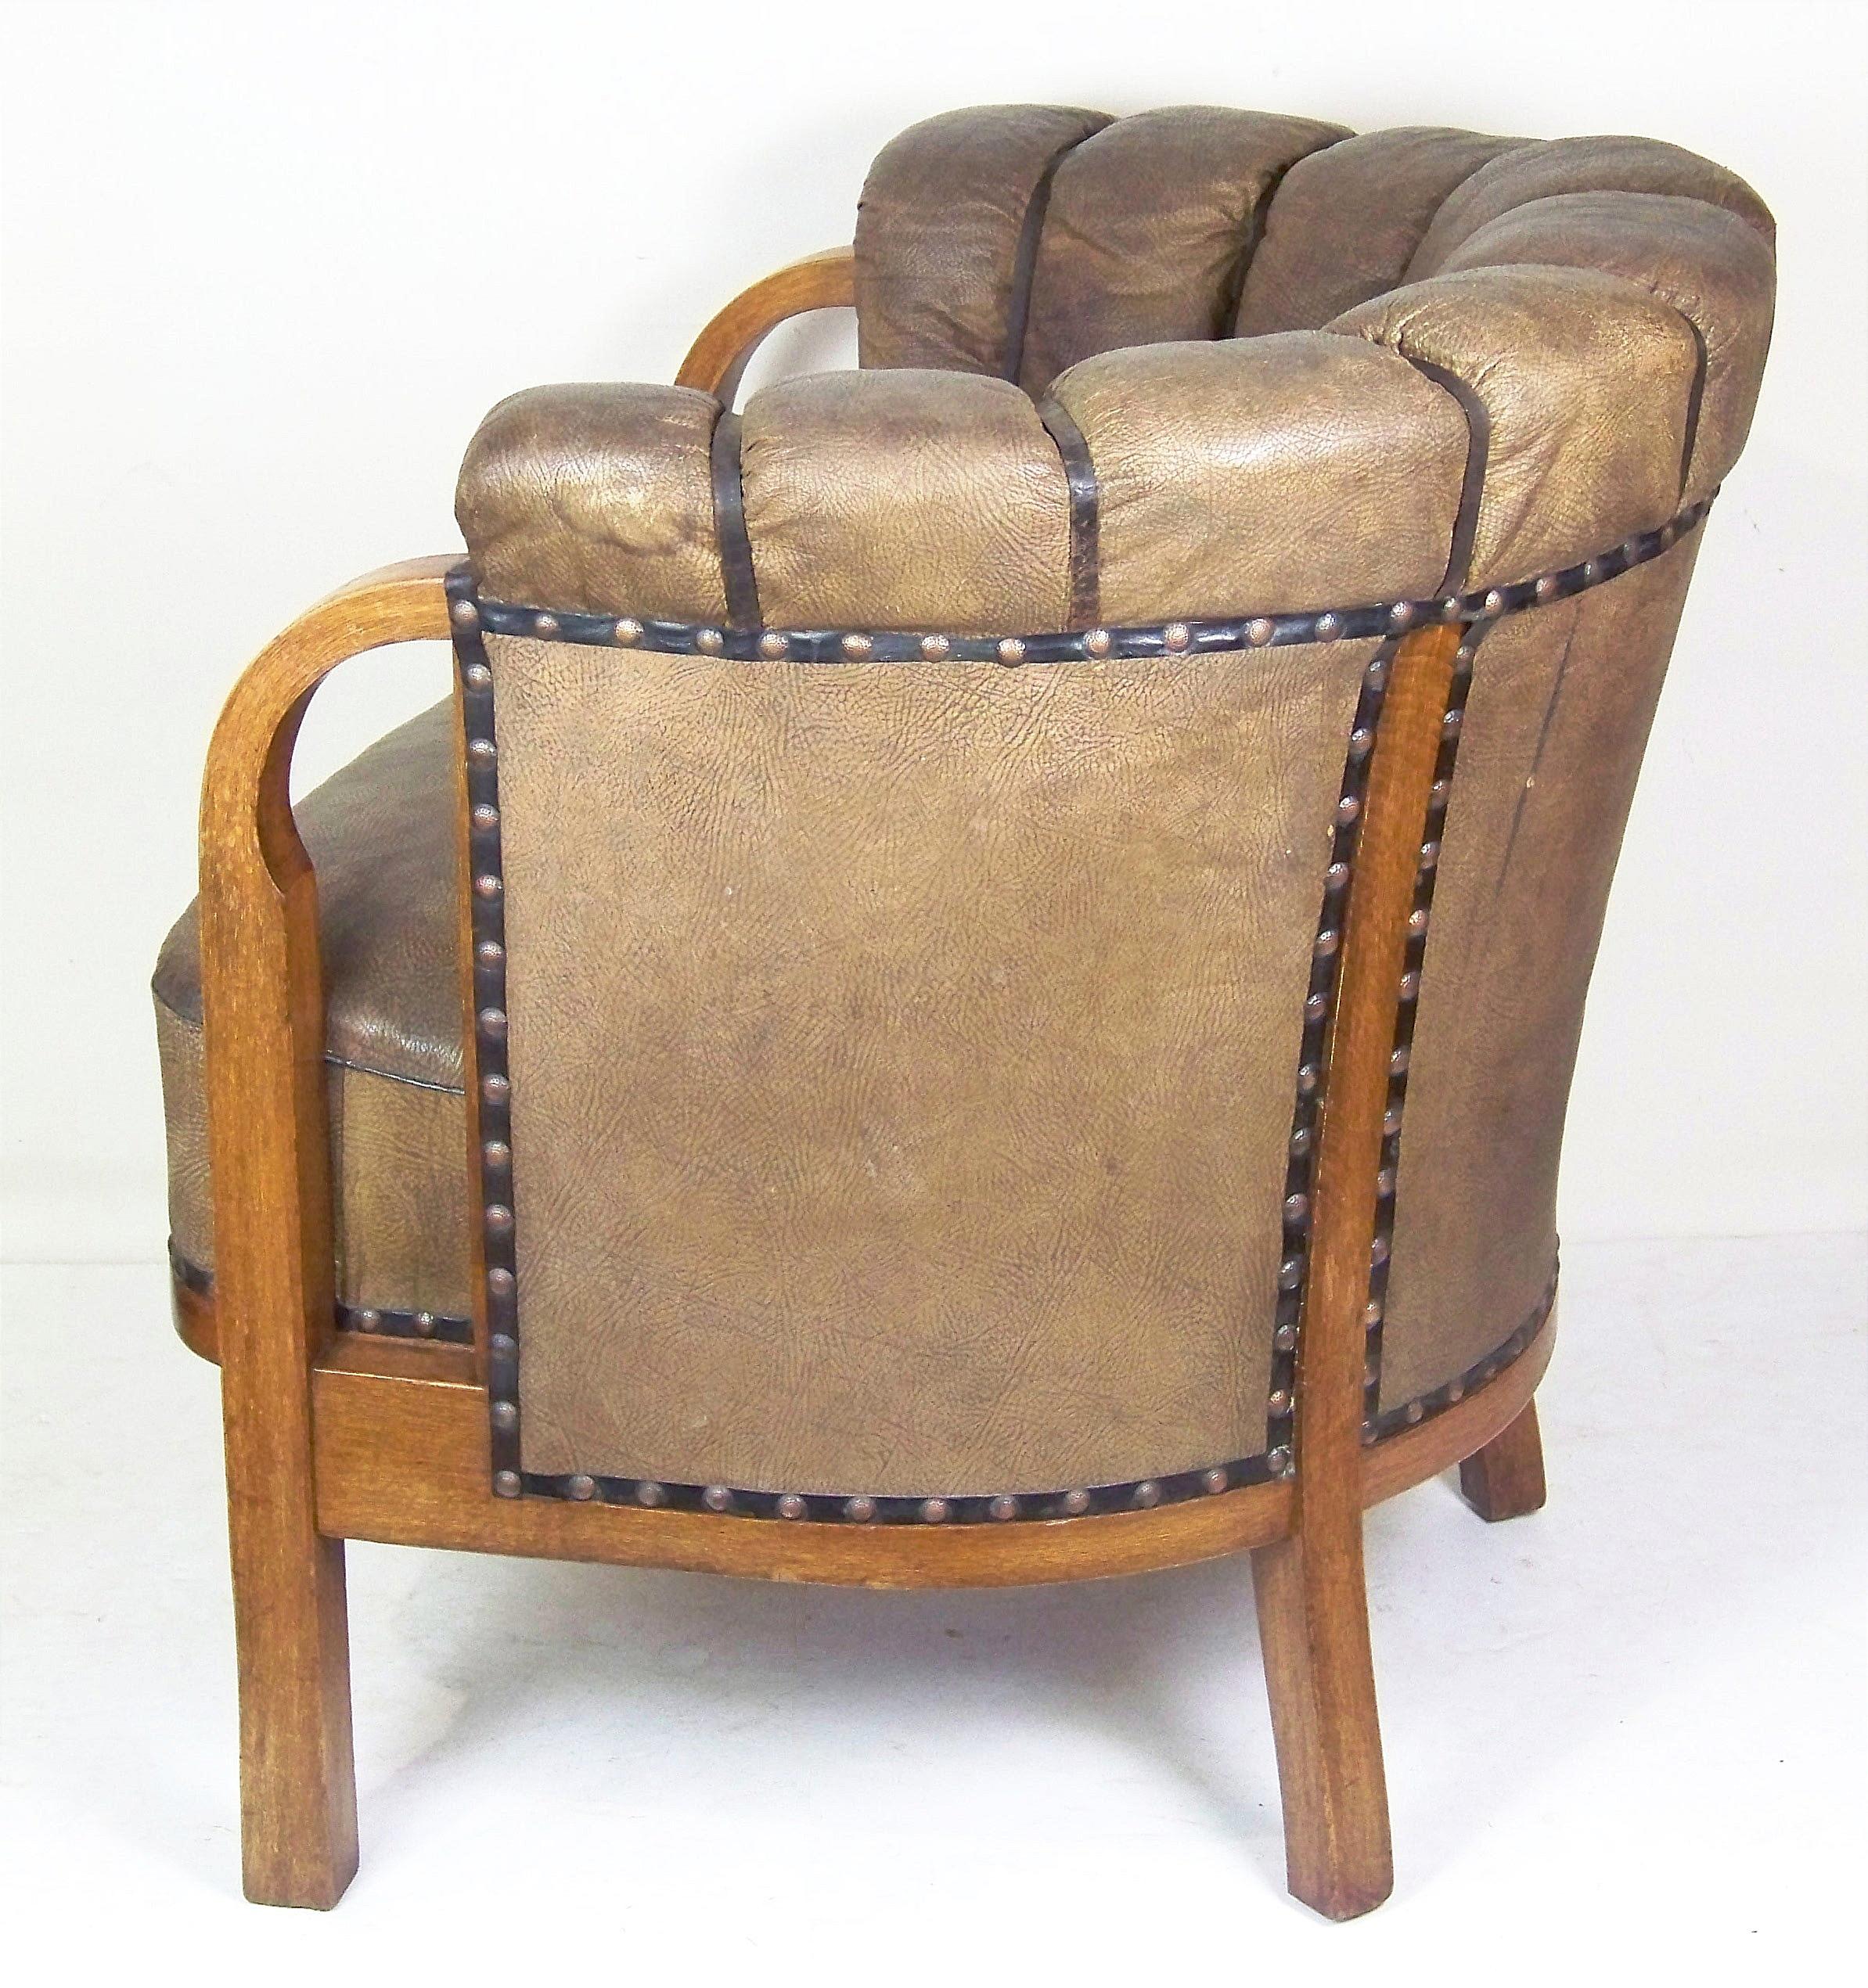 The structure of the armchair is made of bent beech wood. Surface finish the wood is original, preserved with a beautiful patina of age. It is a luxurious finish - oak wood imitation.

The upholstery is original natural leather, apart from minor